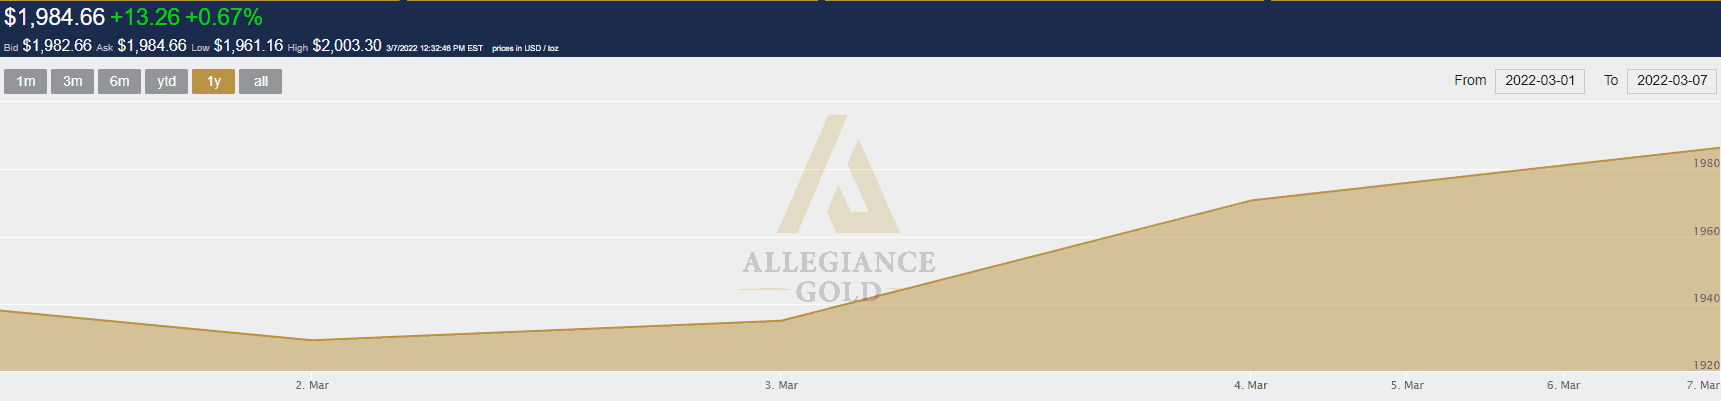 gold on the rise again